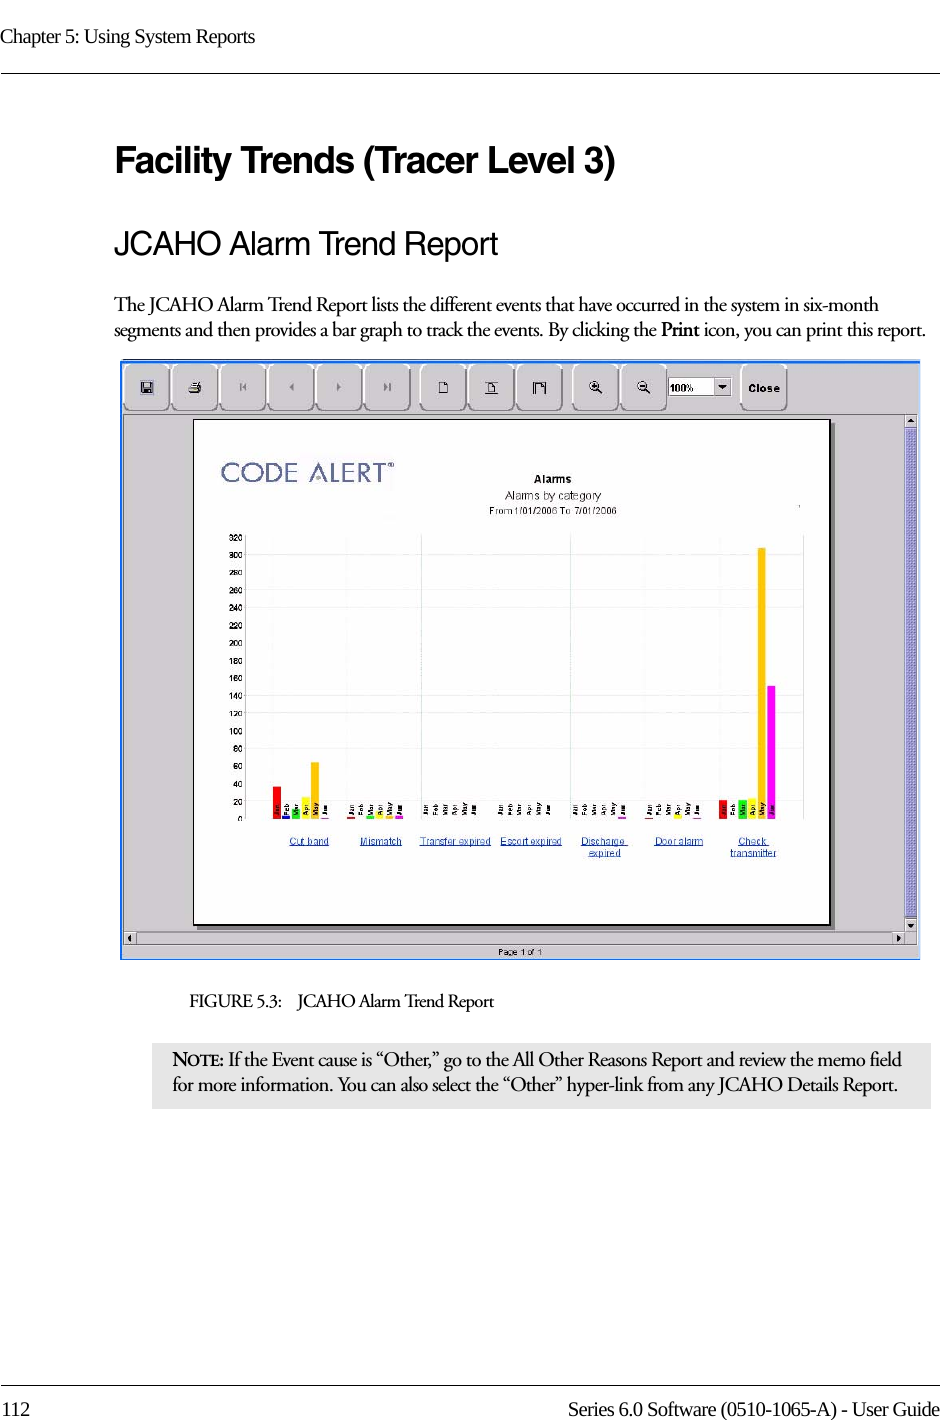 Chapter 5: Using System Reports112 Series 6.0 Software (0510-1065-A) - User GuideFacility Trends (Tracer Level 3)JCAHO Alarm Trend ReportThe JCAHO Alarm Trend Report lists the different events that have occurred in the system in six-month segments and then provides a bar graph to track the events. By clicking the Print icon, you can print this report.FIGURE 5.3:    JCAHO Alarm Trend ReportNOTE: If the Event cause is “Other,” go to the All Other Reasons Report and review the memo field for more information. You can also select the “Other” hyper-link from any JCAHO Details Report.